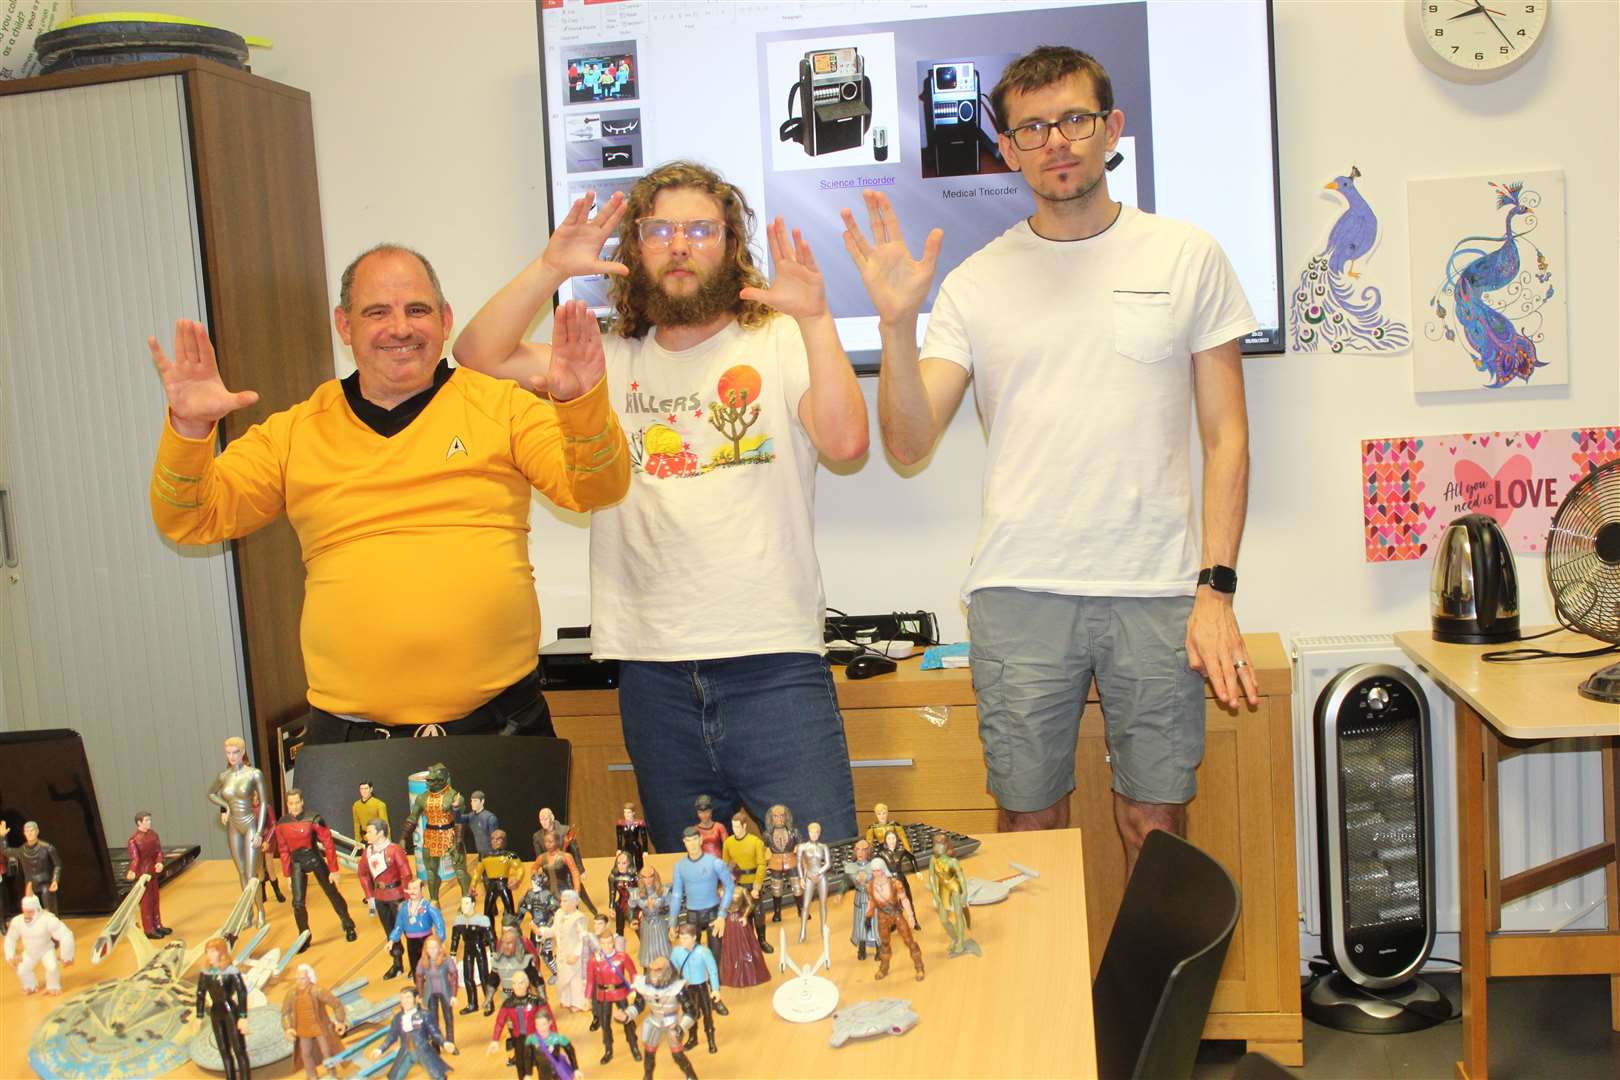 Some of John's Star-Trek army he brought to his presentation at GO on Friday.Picture: Griselda McGregor